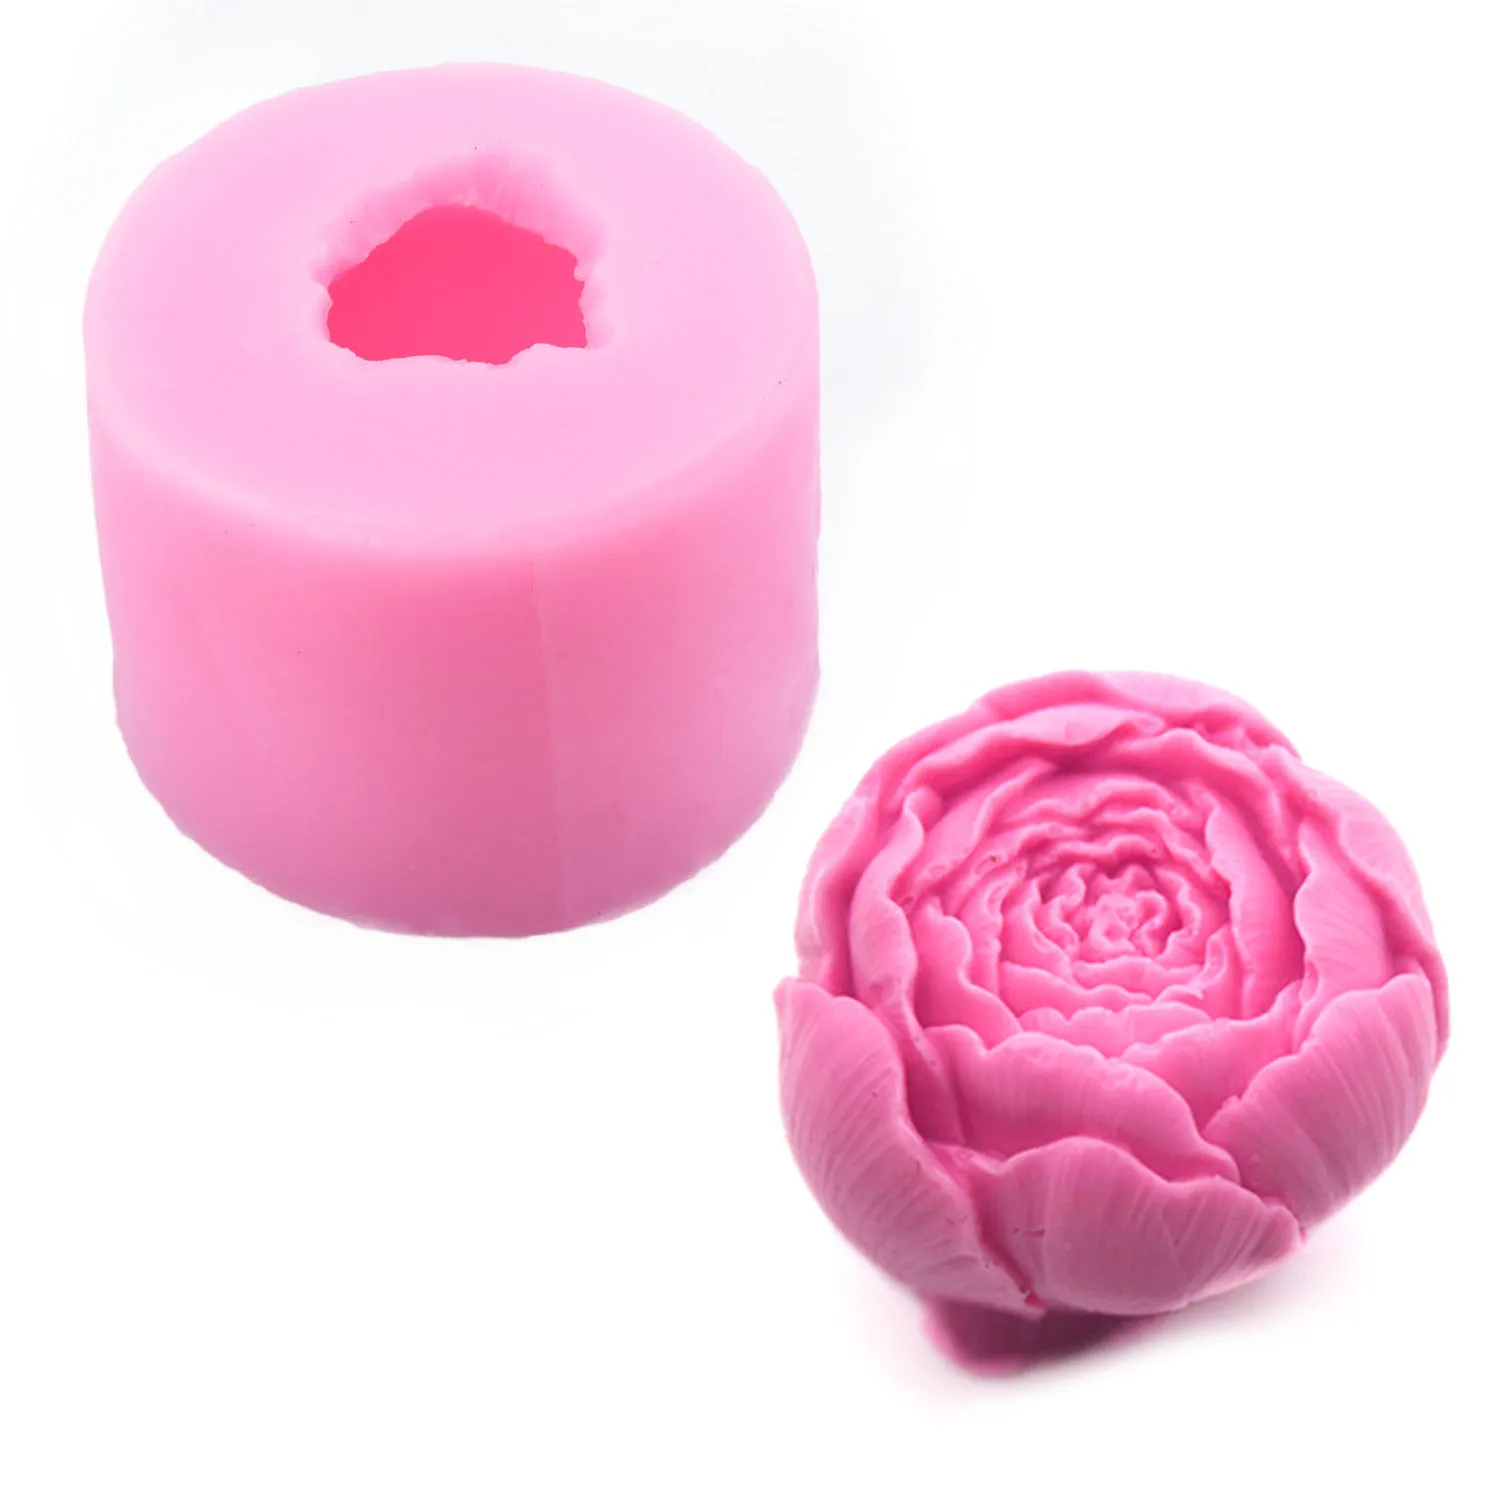 Chocolate S5R9 Mould SELL S1M3 3D Rose Flower Silicone Fondant Mold Cake Decor 